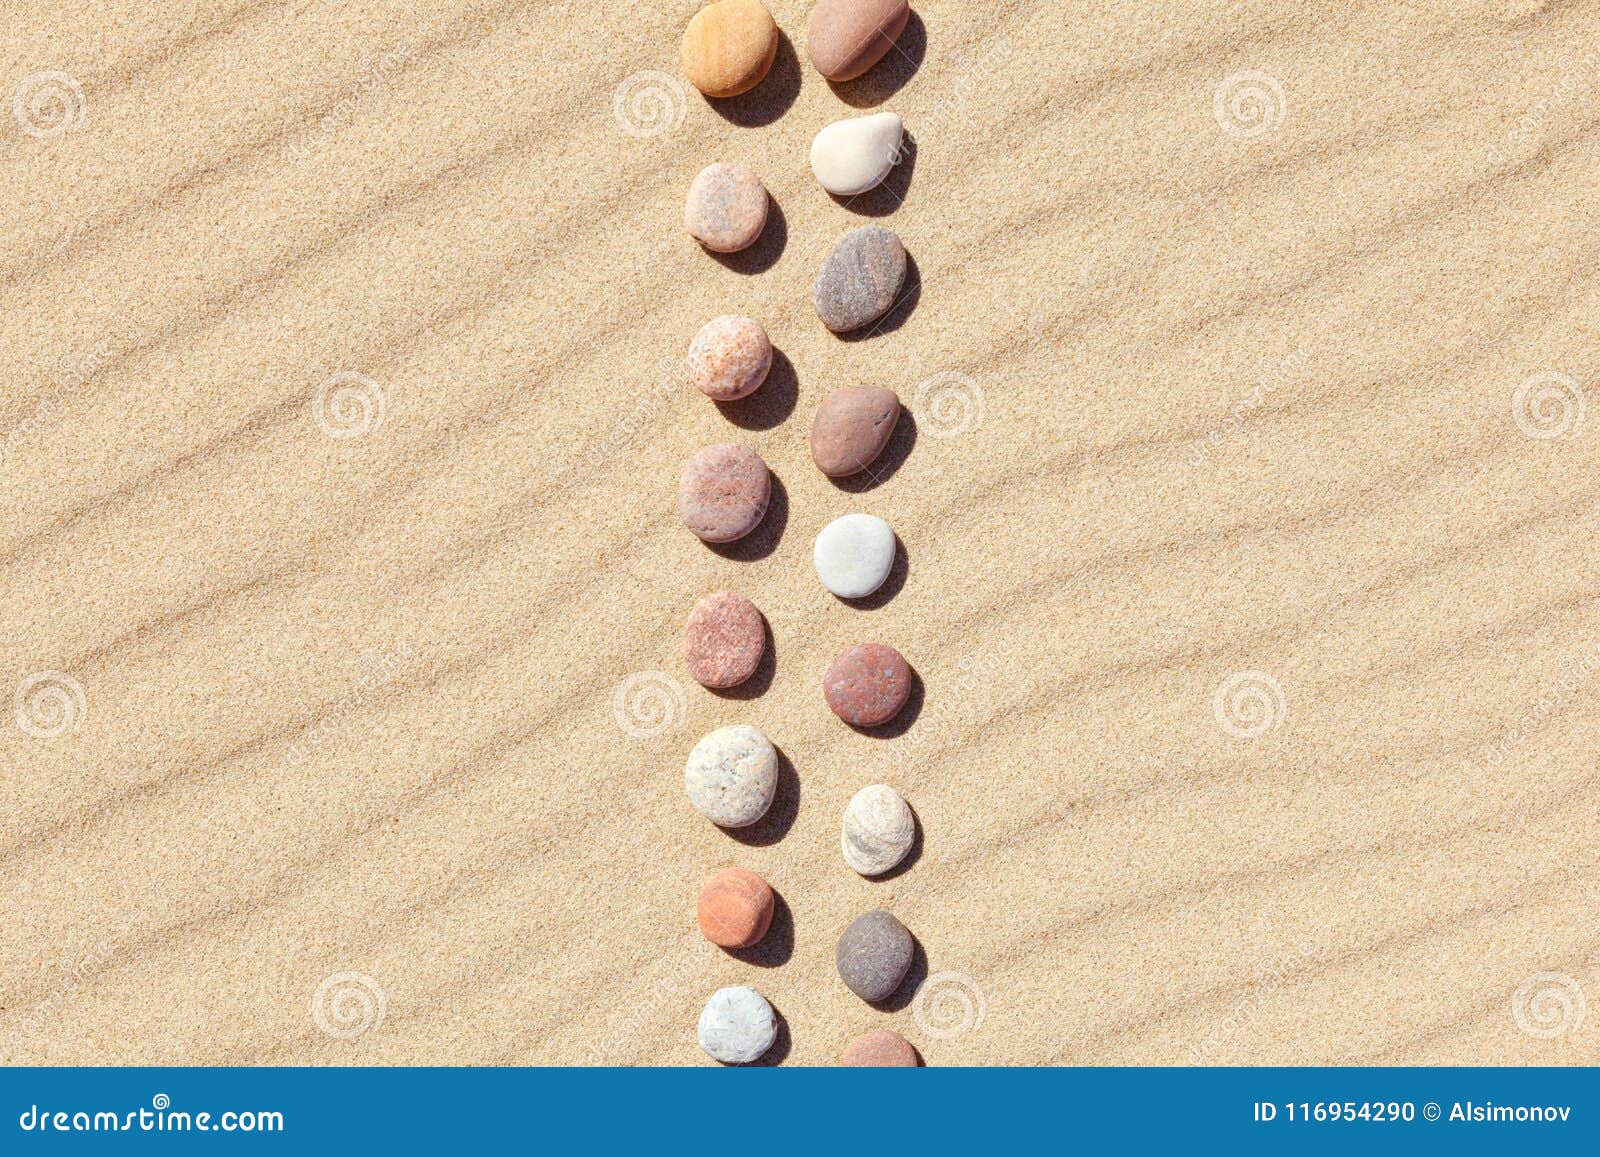 pattern of colored pebbles on clean sand. zen background, harmony and meditation concept